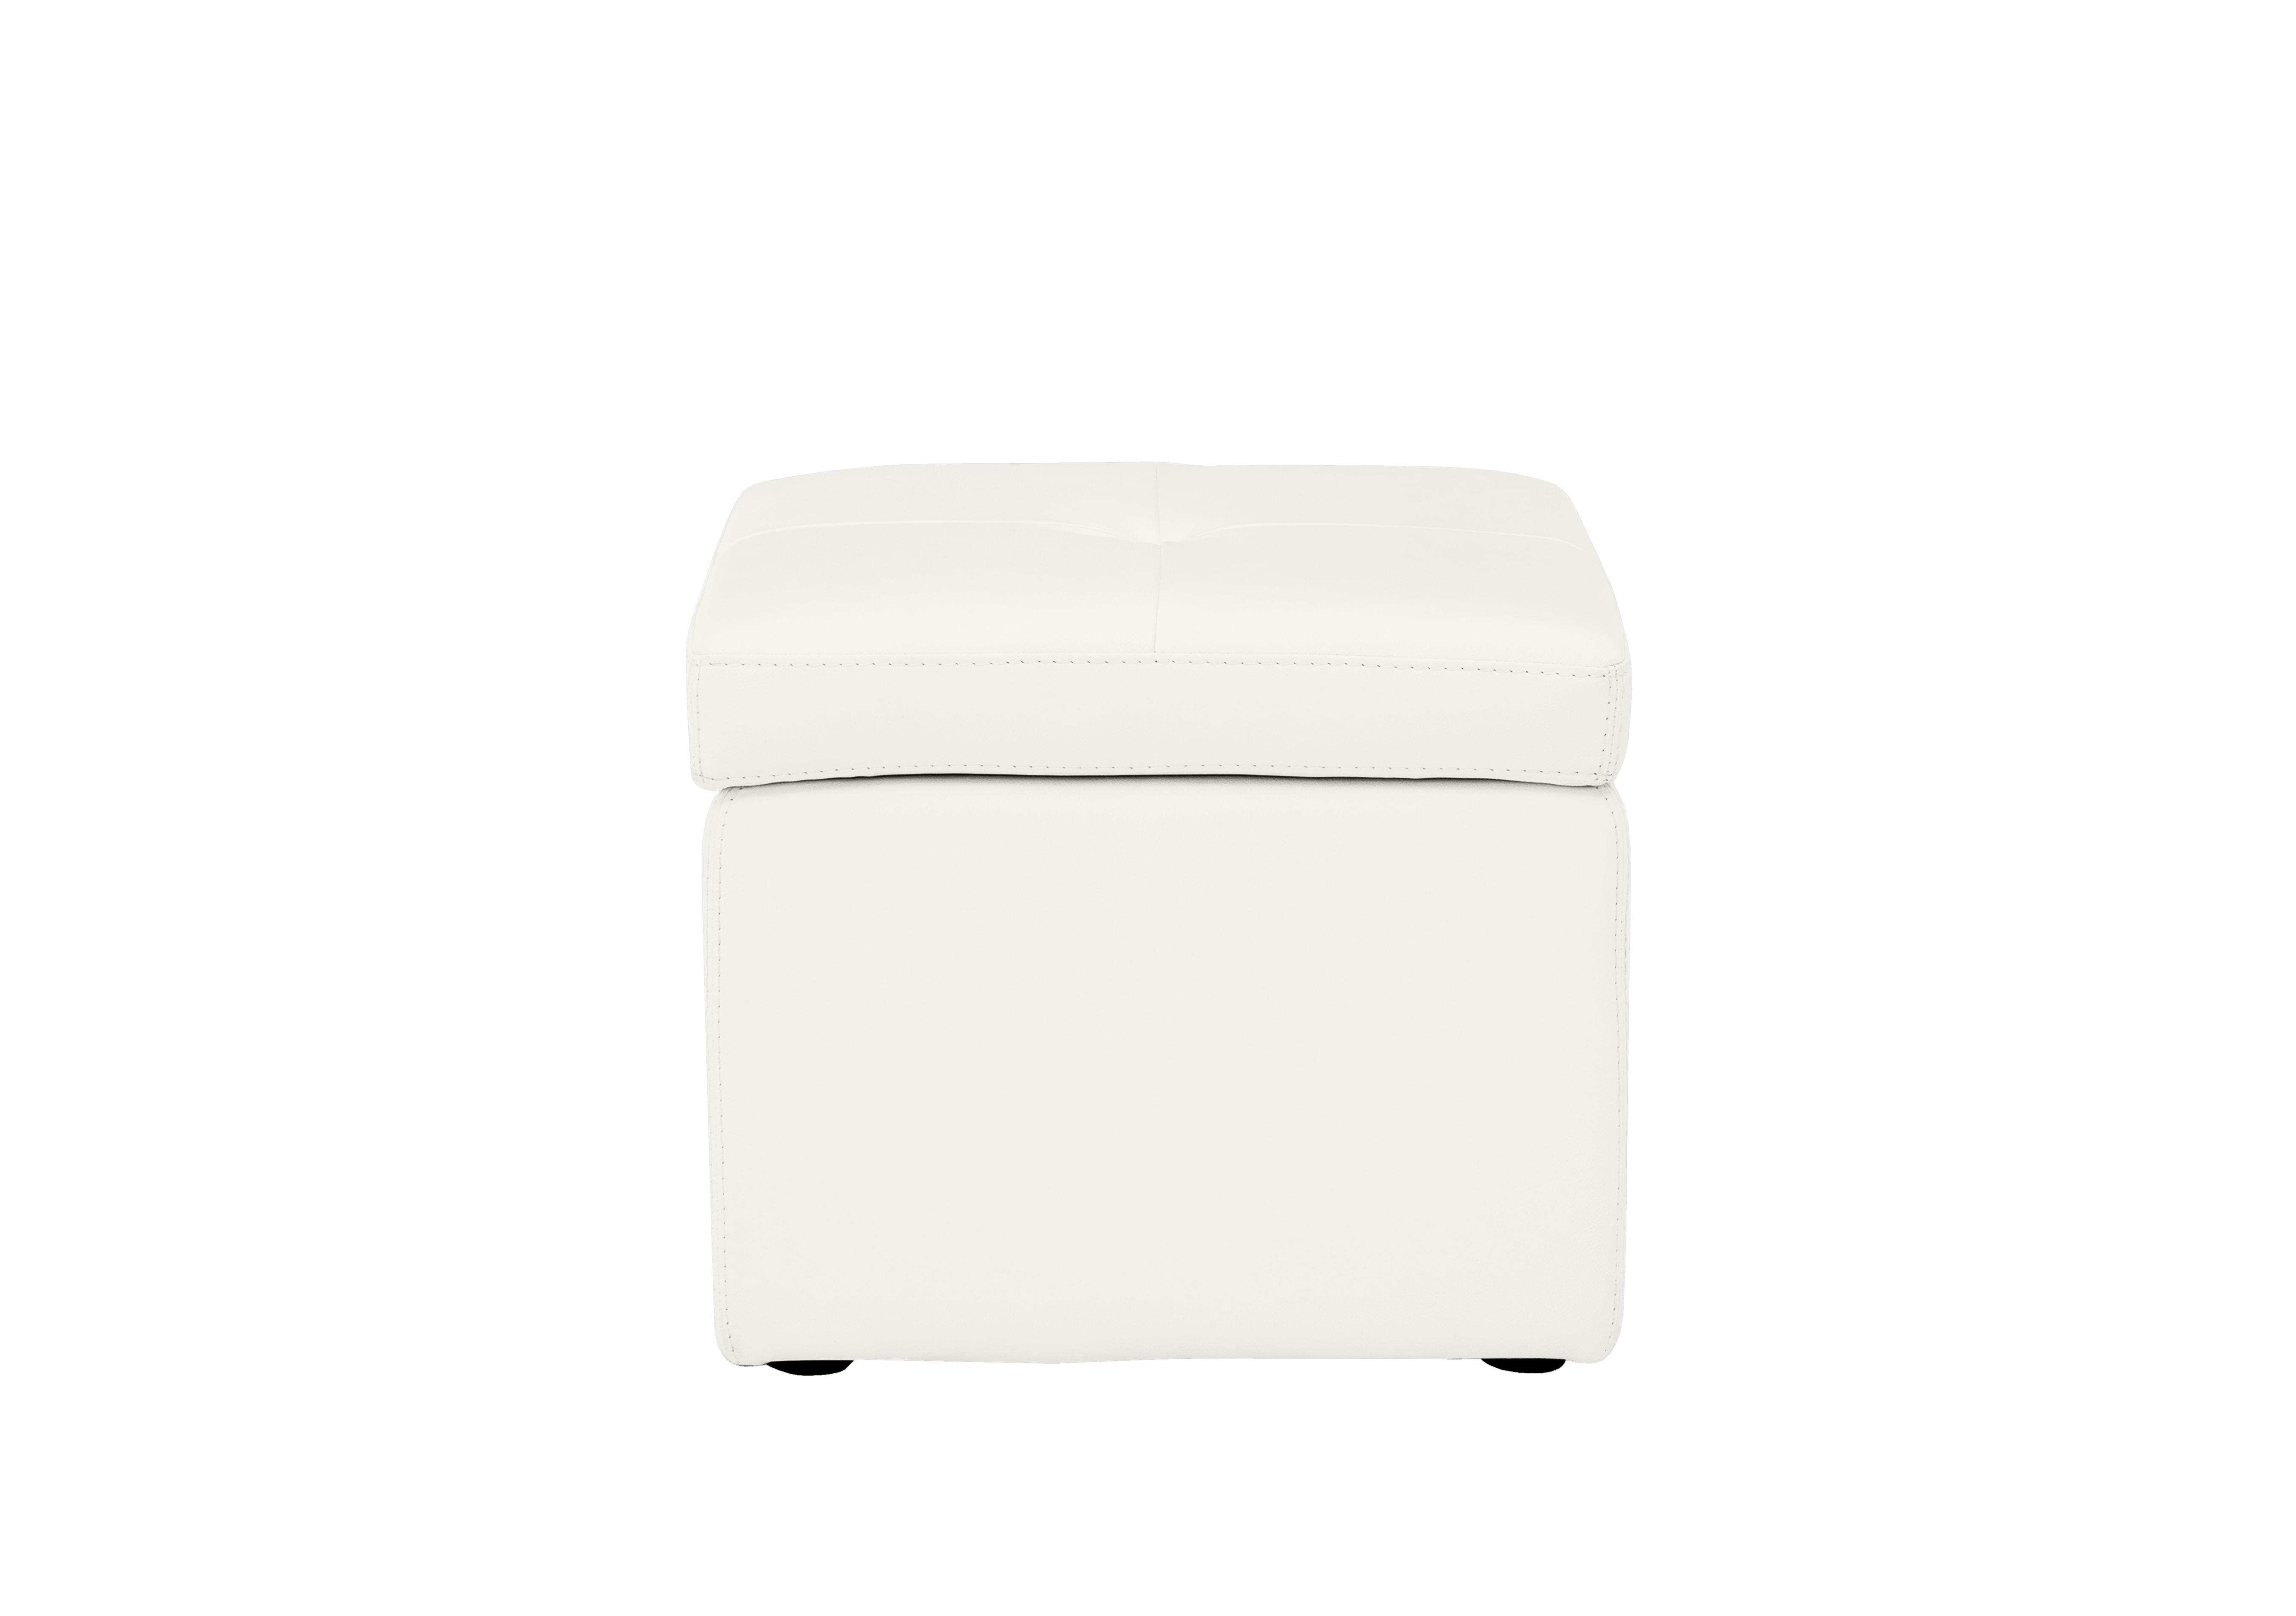 Easy Tray Leather Storage Footstool in Nc-744d Star White on Furniture Village